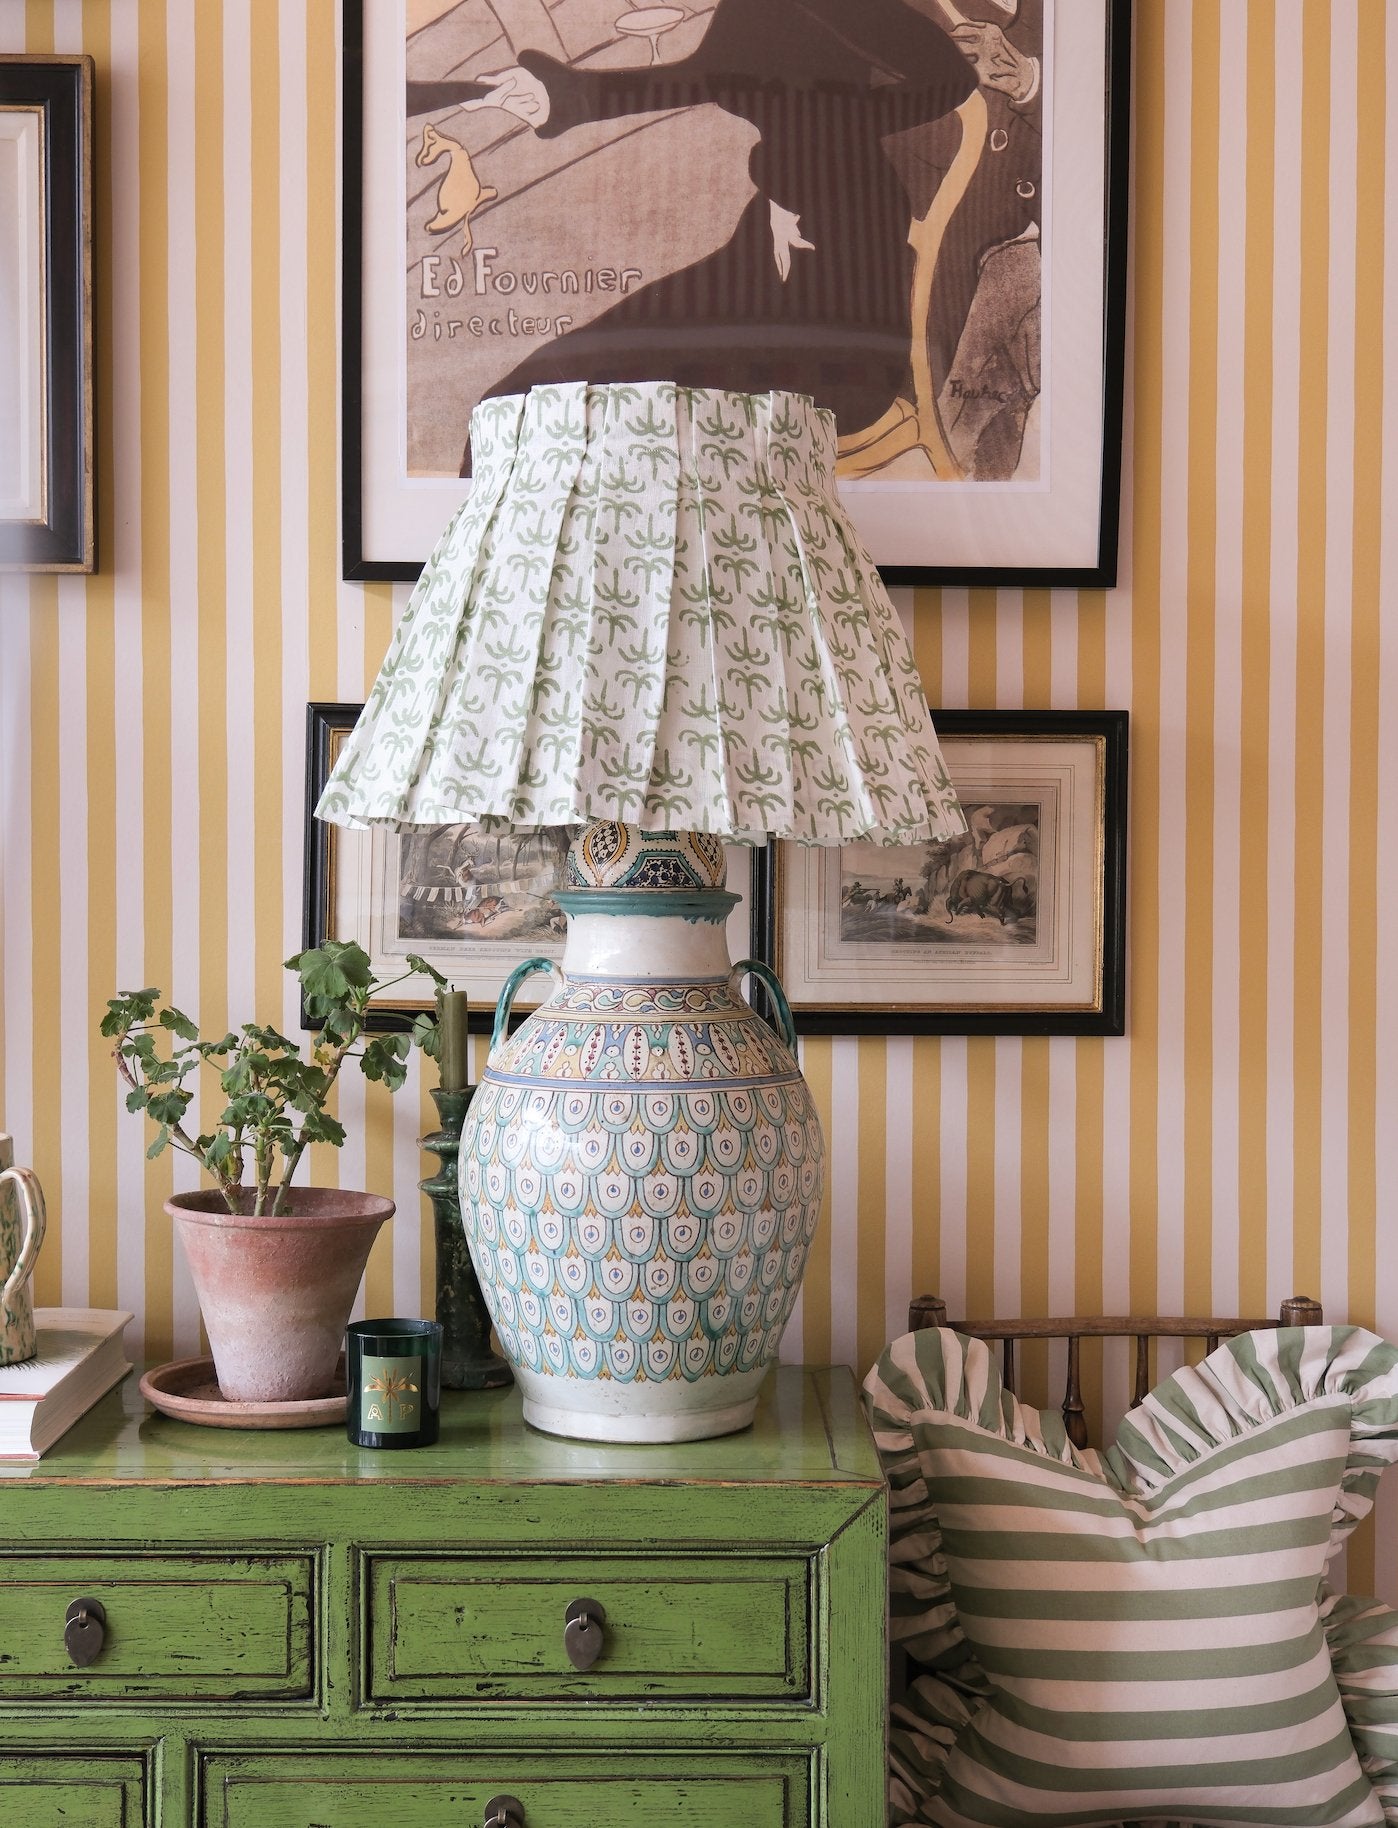 Green Callaloo Linen Structured Box Pleat Lampshade - Alice Palmer & Co